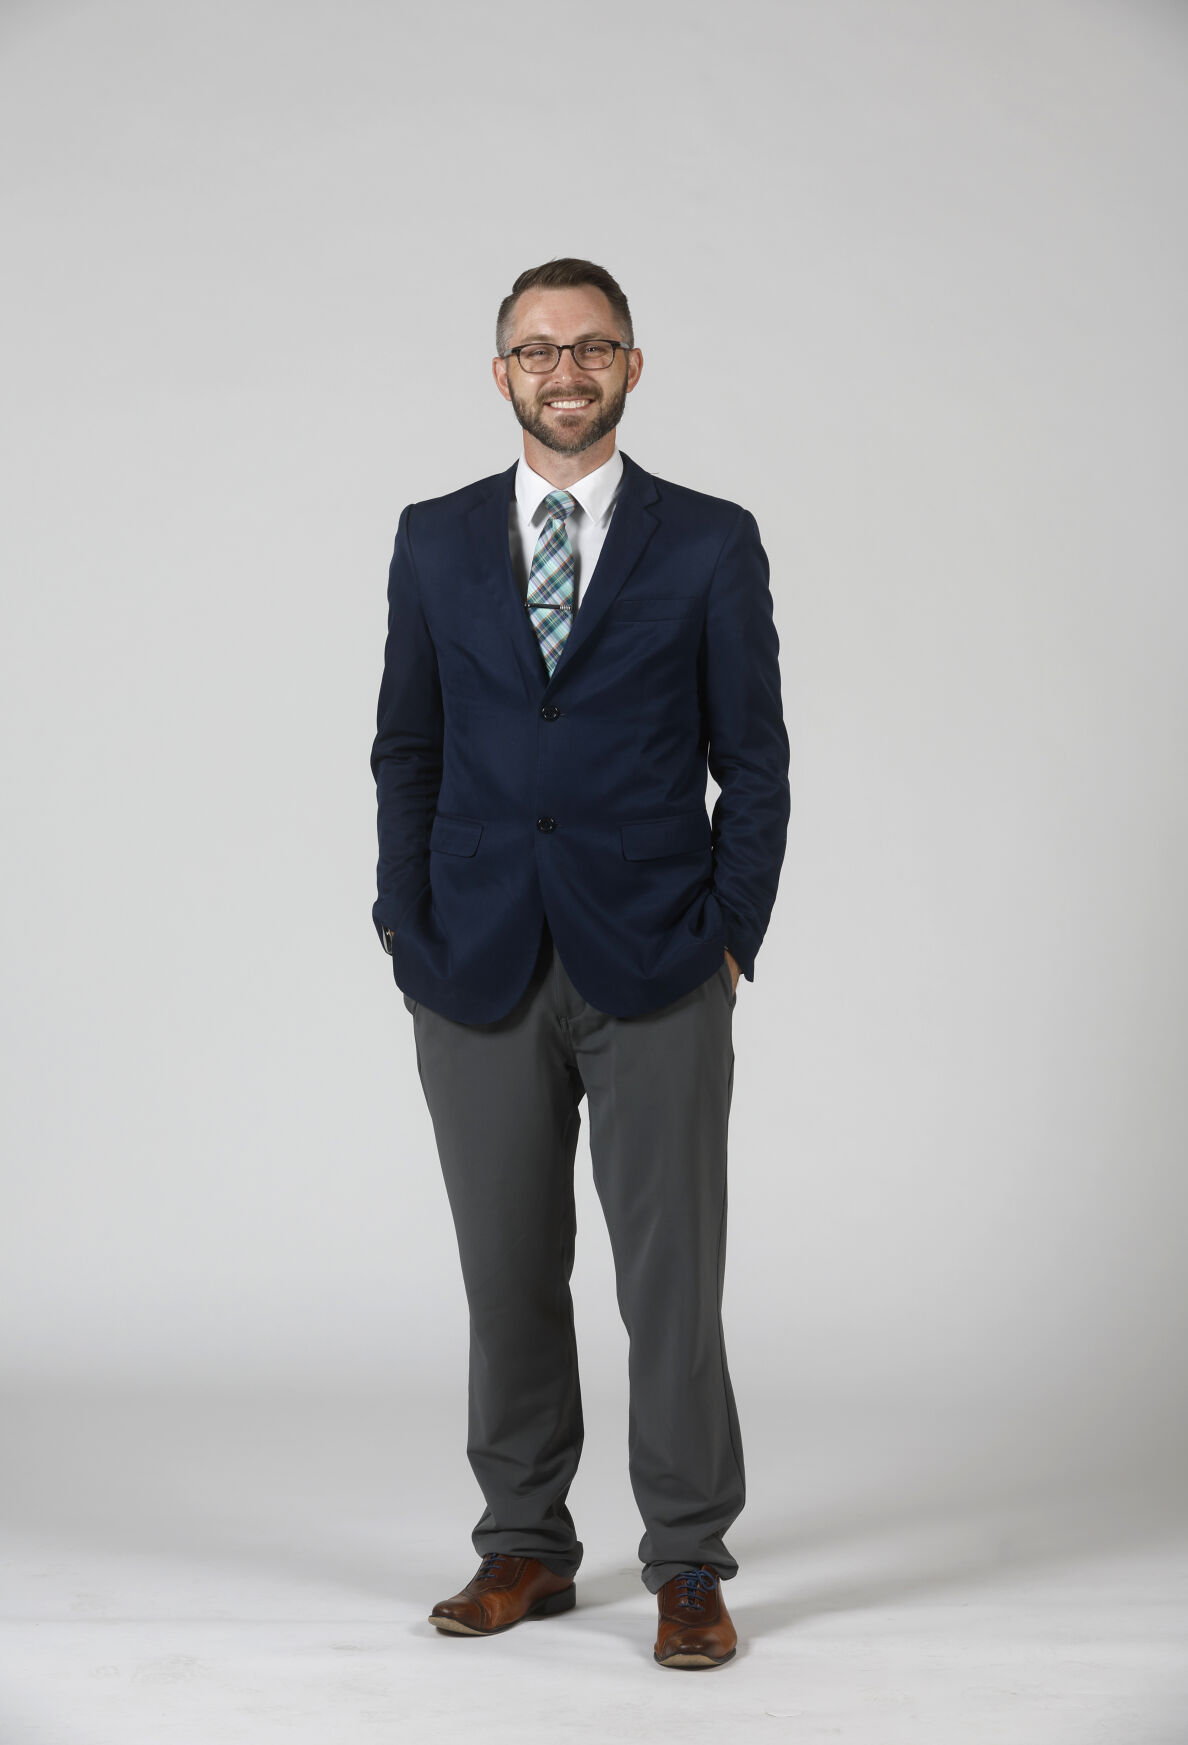 Dr. Nate Harold, with MedOne Pharmacy Benefit Solutions, is a Rising Star.    PHOTO CREDIT: Jessica Reilly